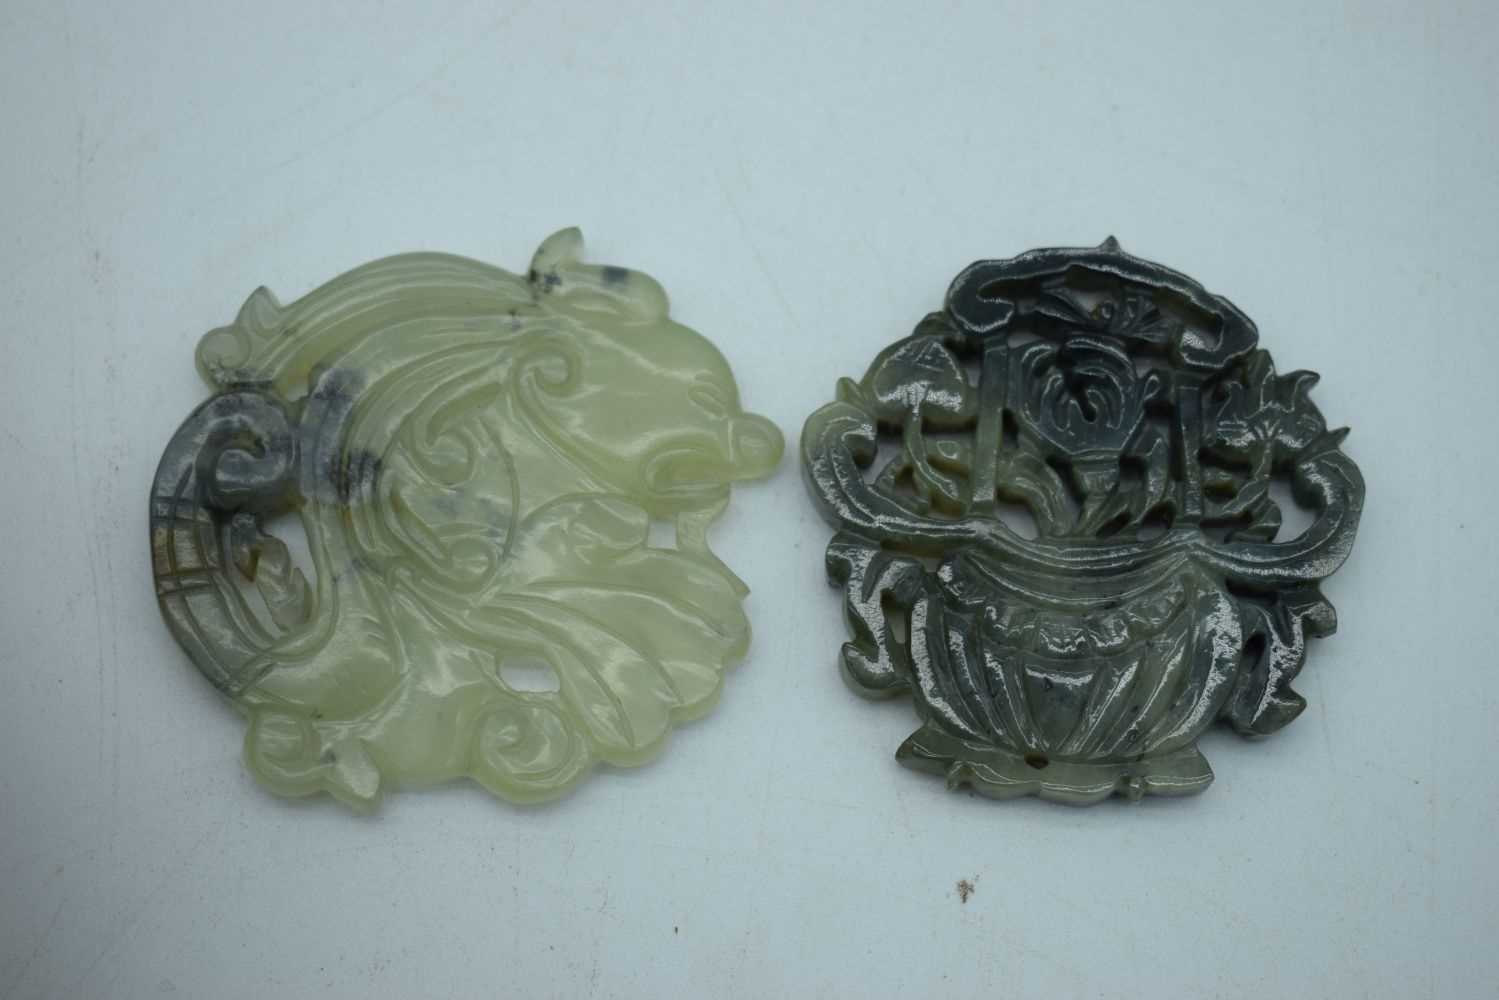 TWO CHINESE JADE PLAQUES. 73 grams. 6.75 cm x 6 cm. (2) - Image 2 of 3